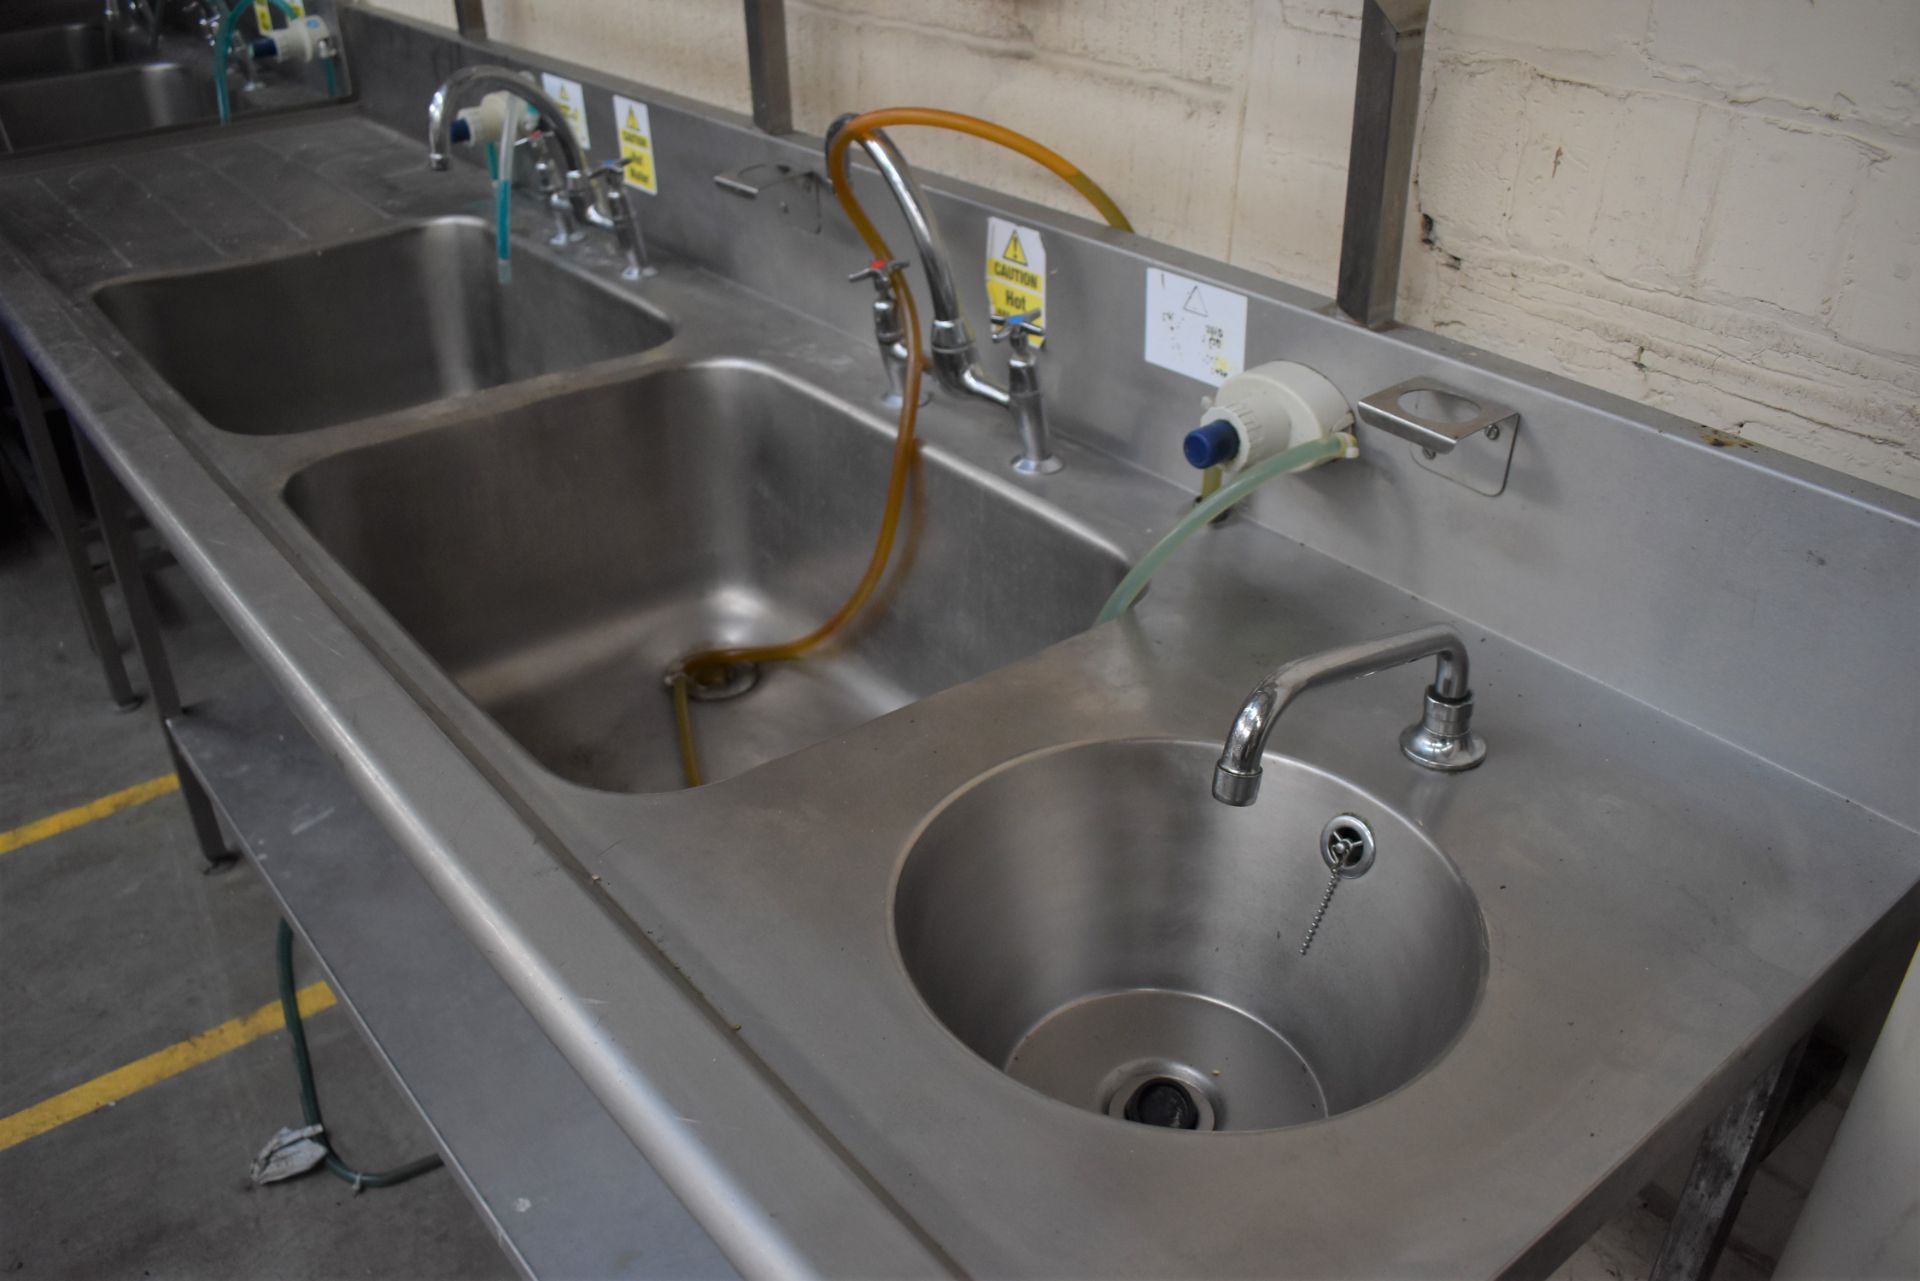 1 x Stainless Steel Commercial Wash Basin Unit With Twin Sink Bowl, Mixer Taps, Undershelf, Upstands - Image 6 of 8